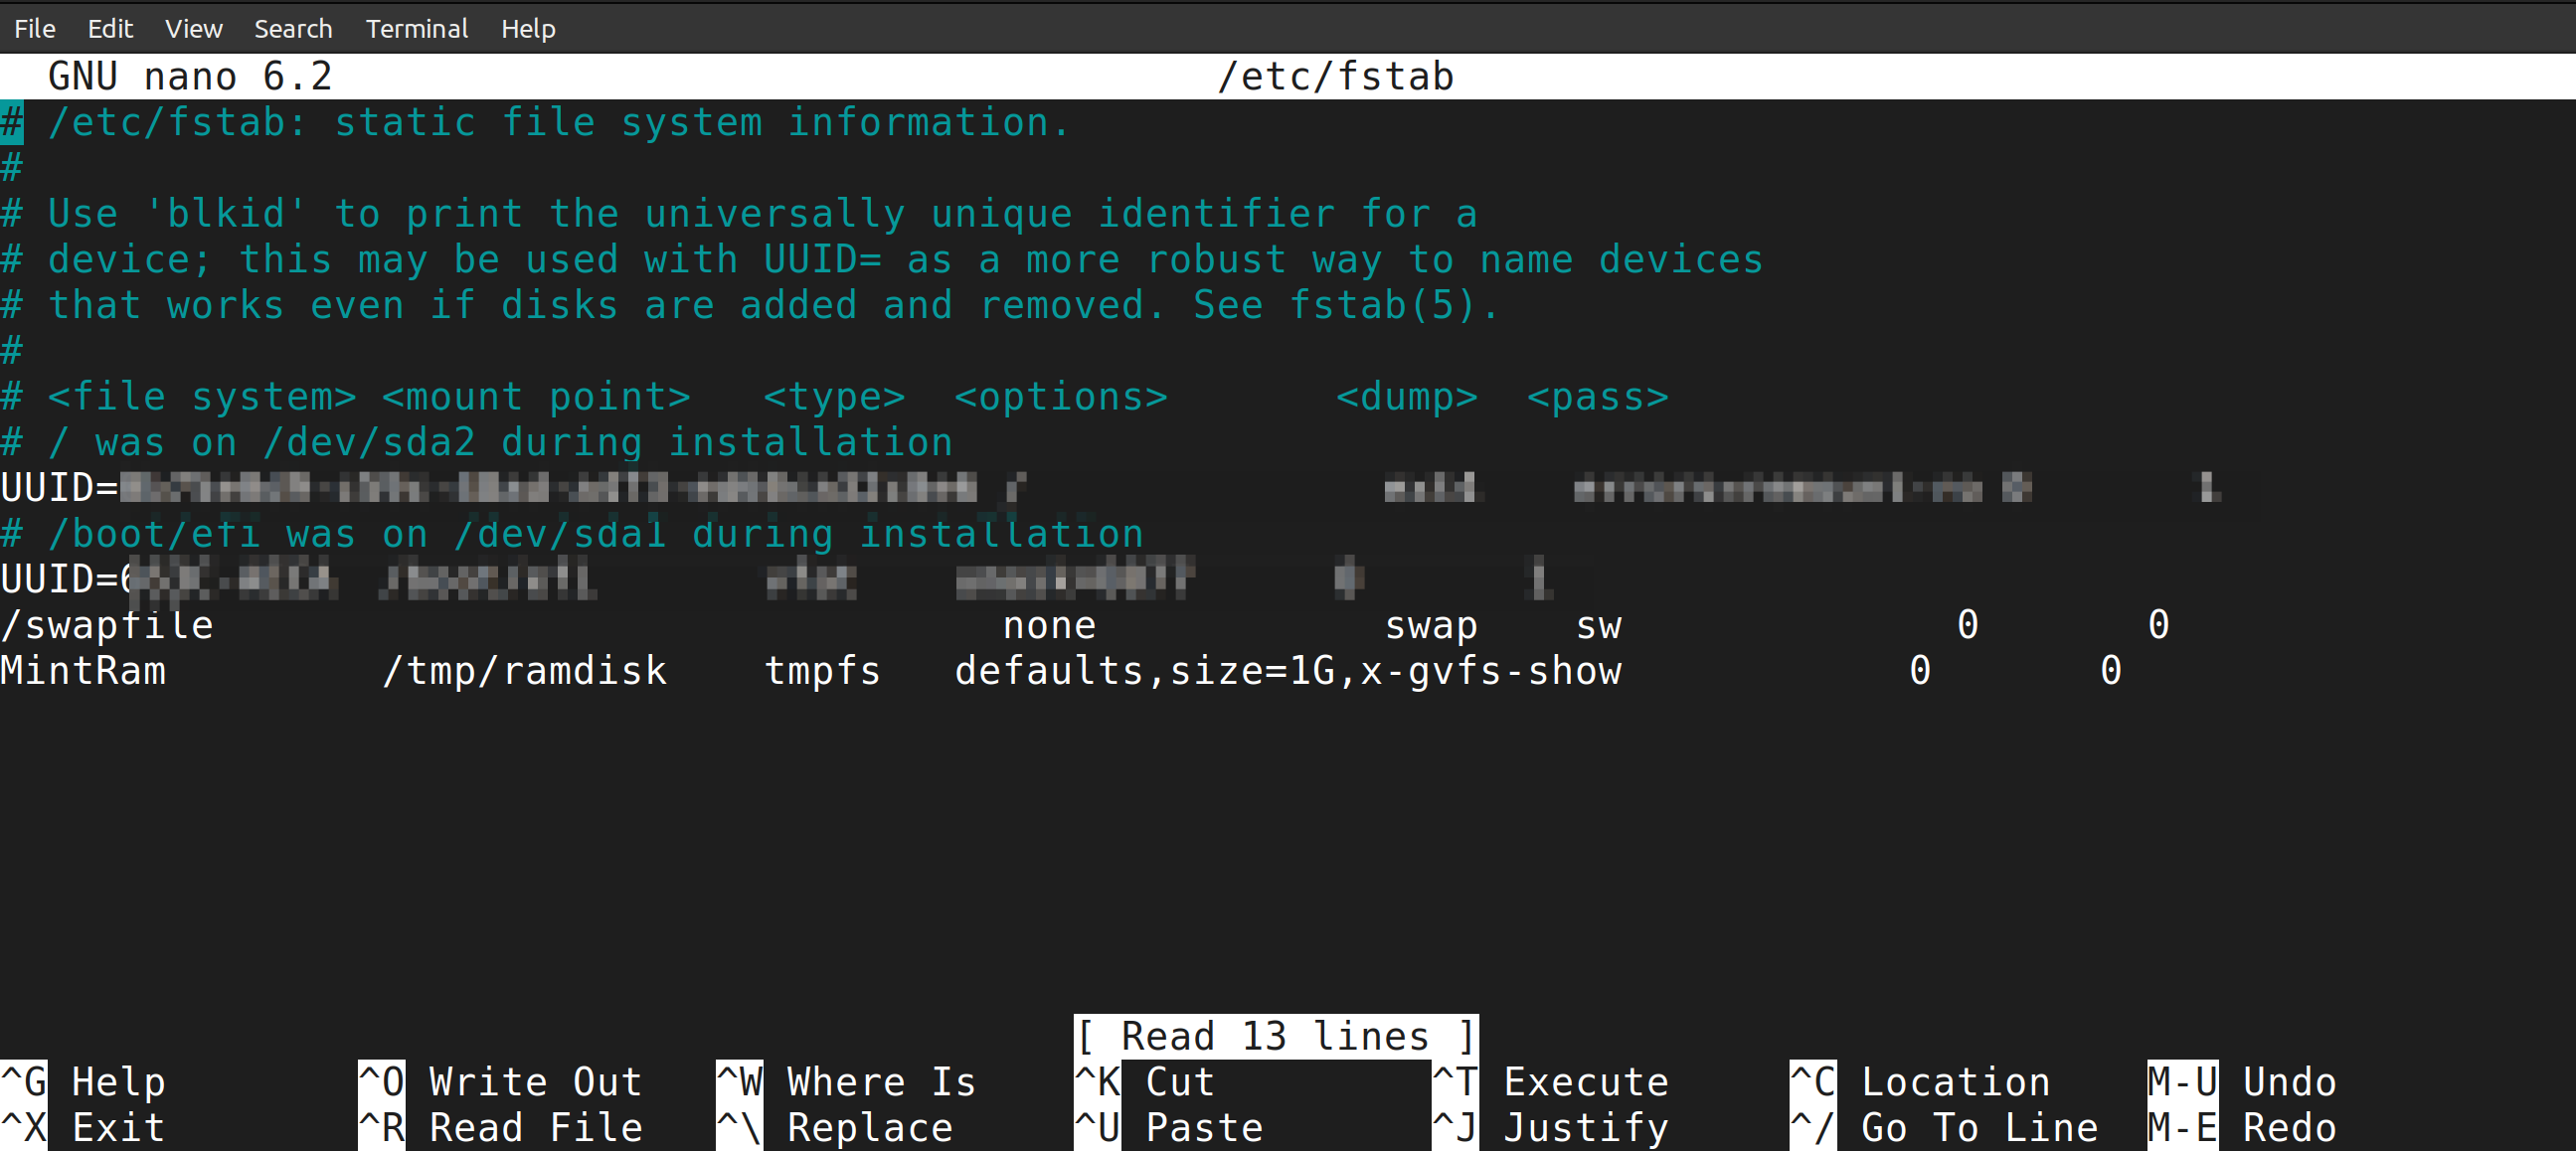 Selection_005-1 Create A RAM Disk For Mint, Ubuntu, and Debian How To Linux OS X Security 